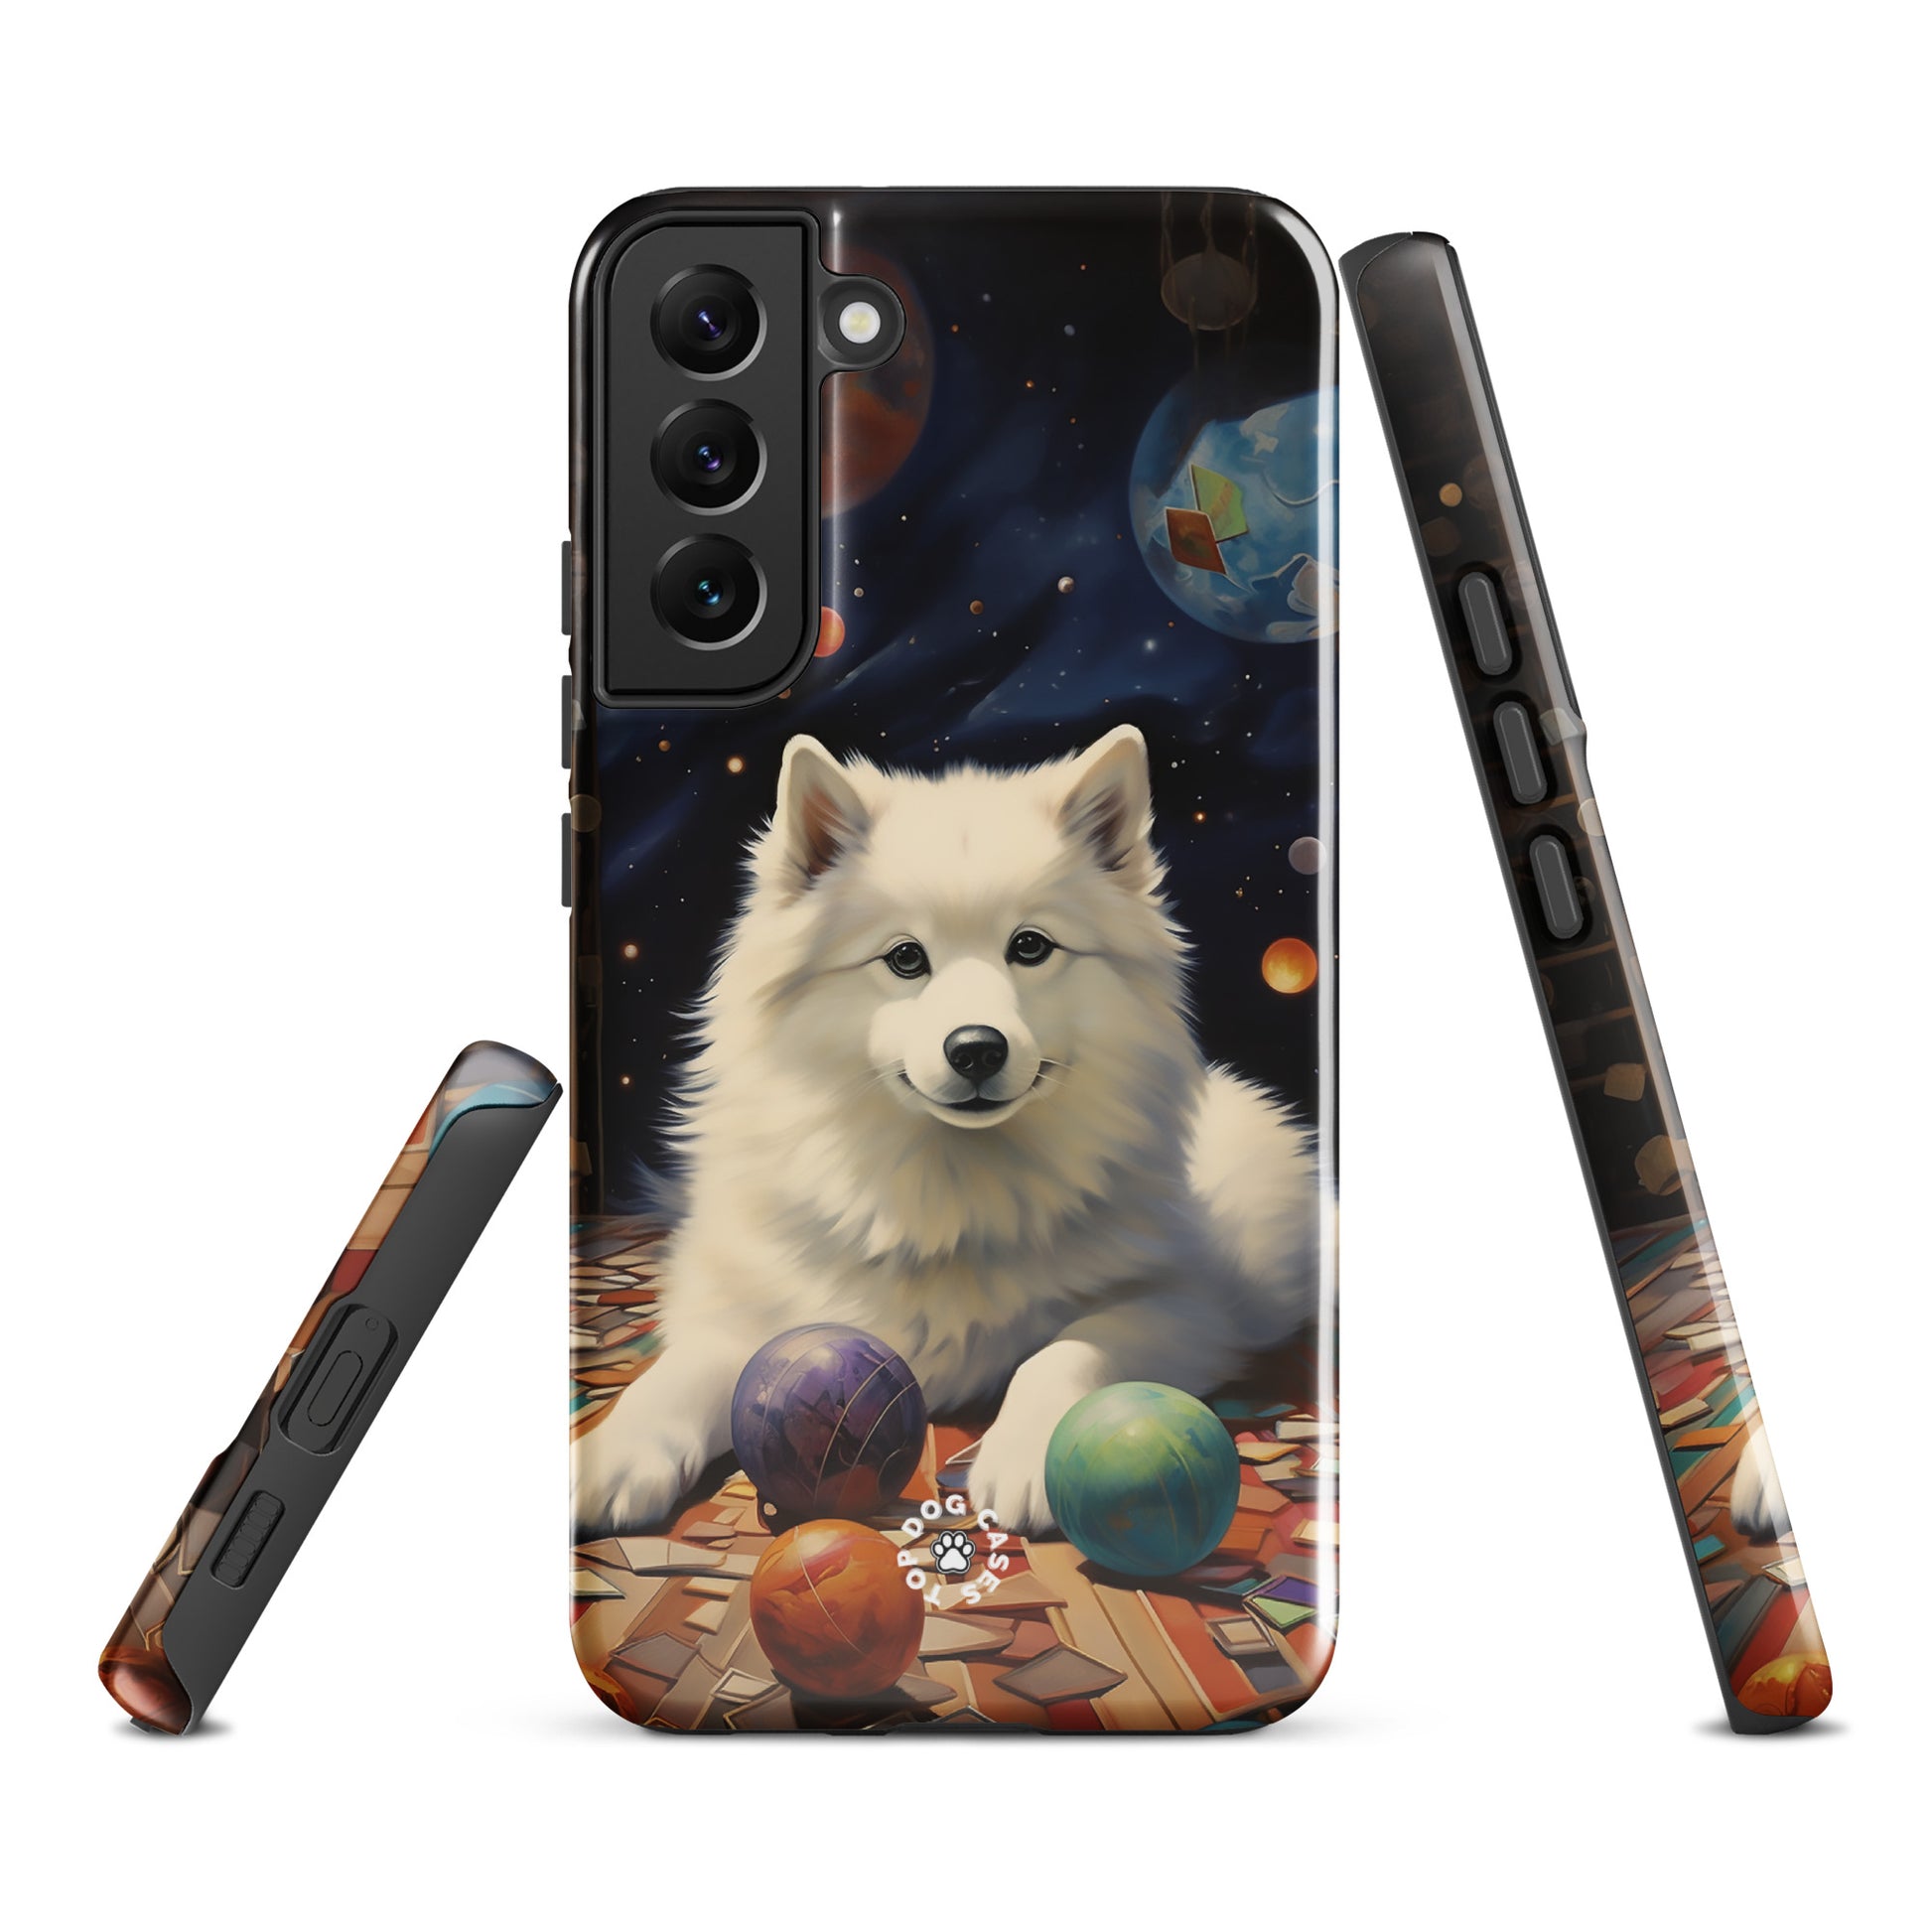 Relaxed White Siberian Husky Galaxy Edition Tough Case for Samsung - Top Dog Cases - #CuteDog, #CuteDogs, #DogInSpace, #DogPhoneCase, #Samsung, #SamsungGalaxy, #SamsungGalaxyCase, #SamsungGalaxyS10, #SamsungGalaxyS20, #SamsungGalaxyS21, #SamsungGalaxyS22, #SamsungGalaxyS22Ultra, #SamsungGalaxyS23, #SamsungGalaxyS23Plus, #SamsungGalaxyS23Ultra, #SamsungPhoneCase, #Siberian Husky, #SiberianHusky, #White Siberian Husky, #WhiteHusky, #WhiteSiberianHusky, SamsungGalaxyS20Plus, SamsungGalaxyS22Plus